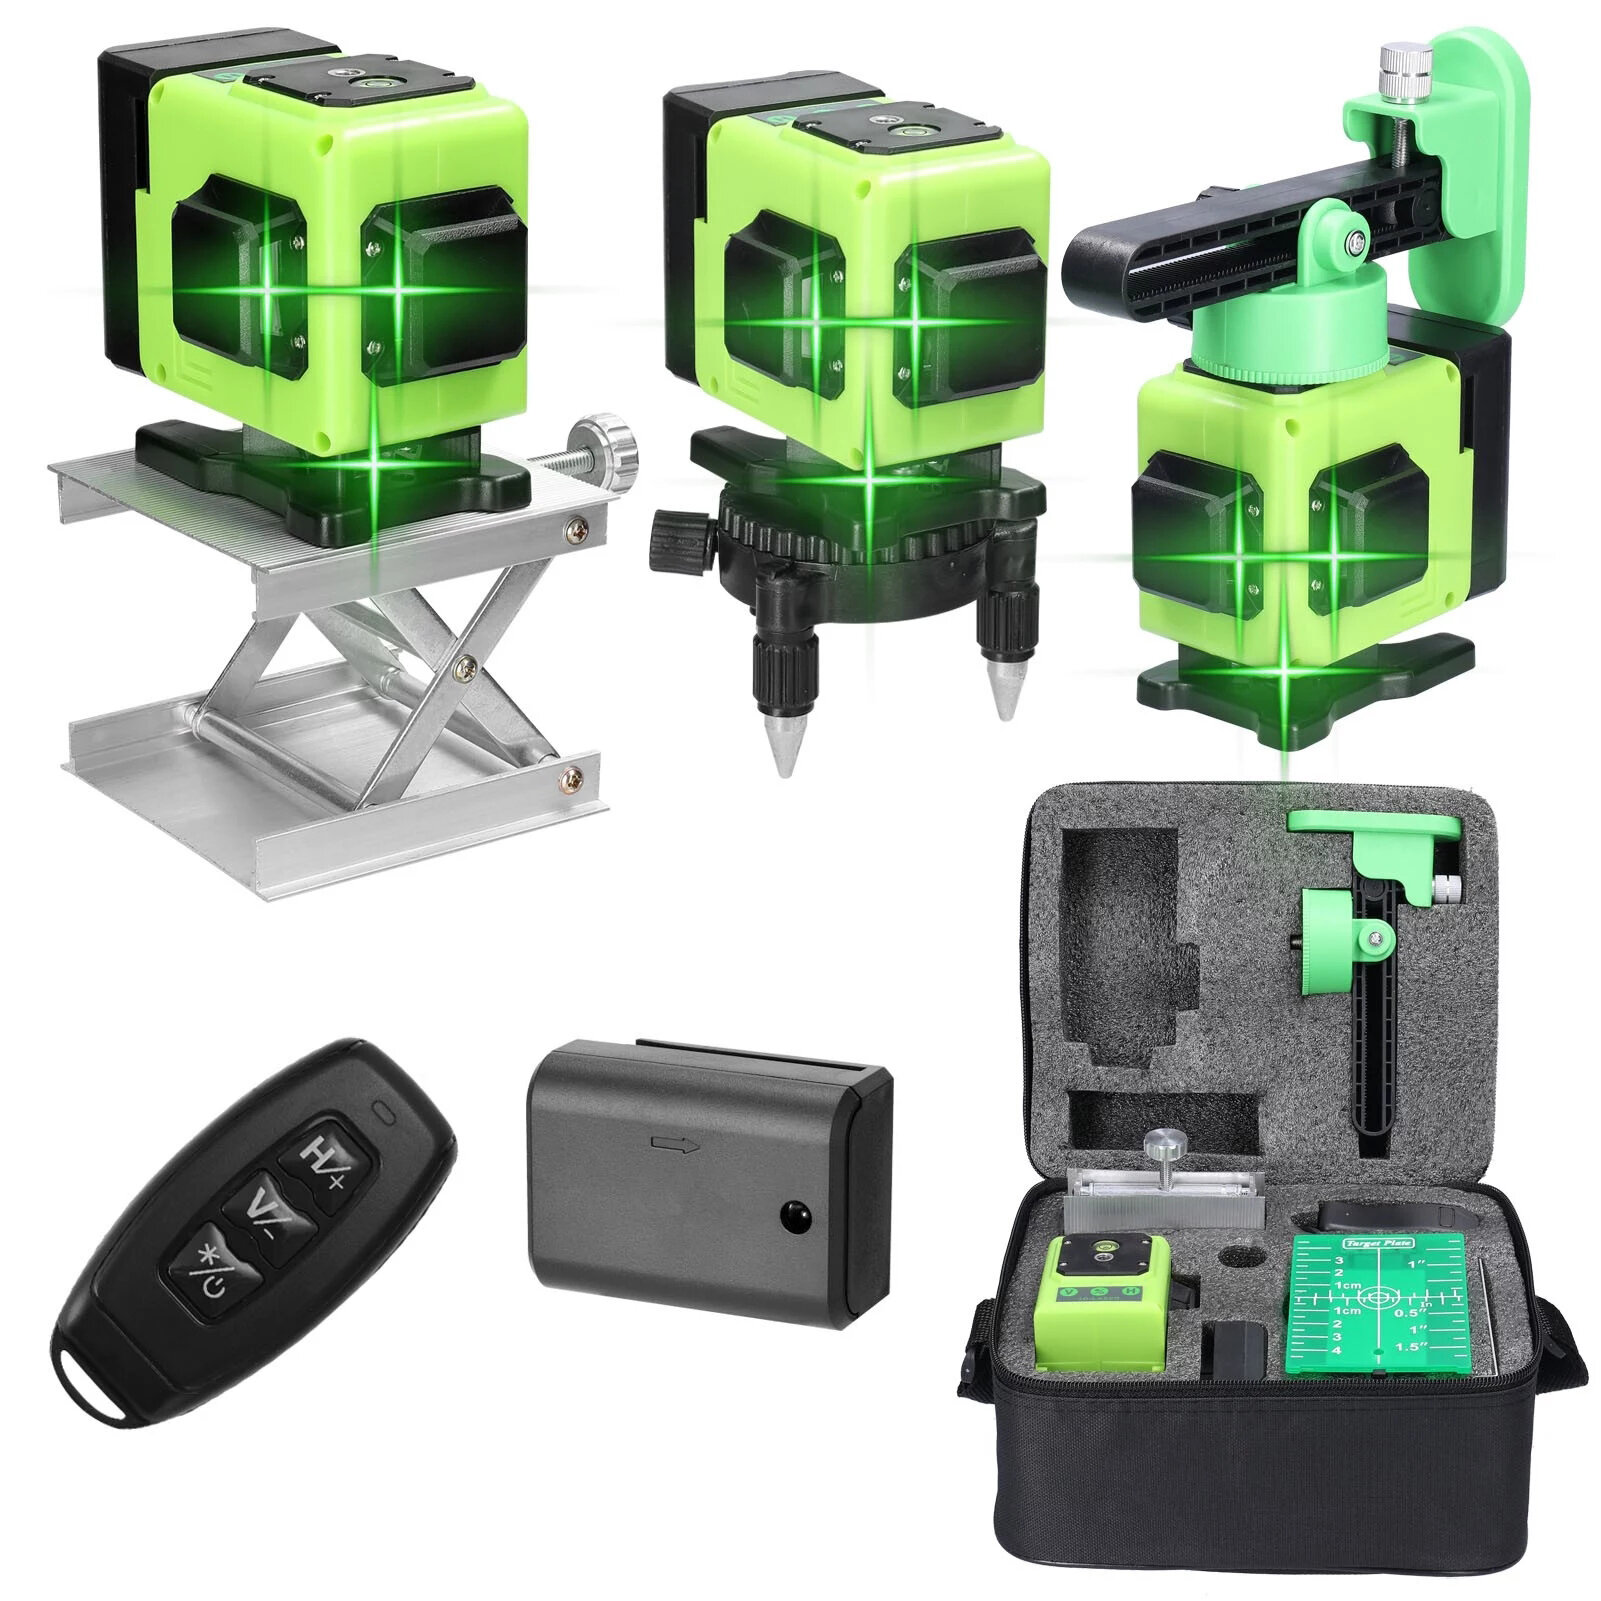 Mini Multifunctional 12 Lines Green Light Laser Level 3° Self-leveling USB Rechargeable Lithium Battery Leveling Tool wi